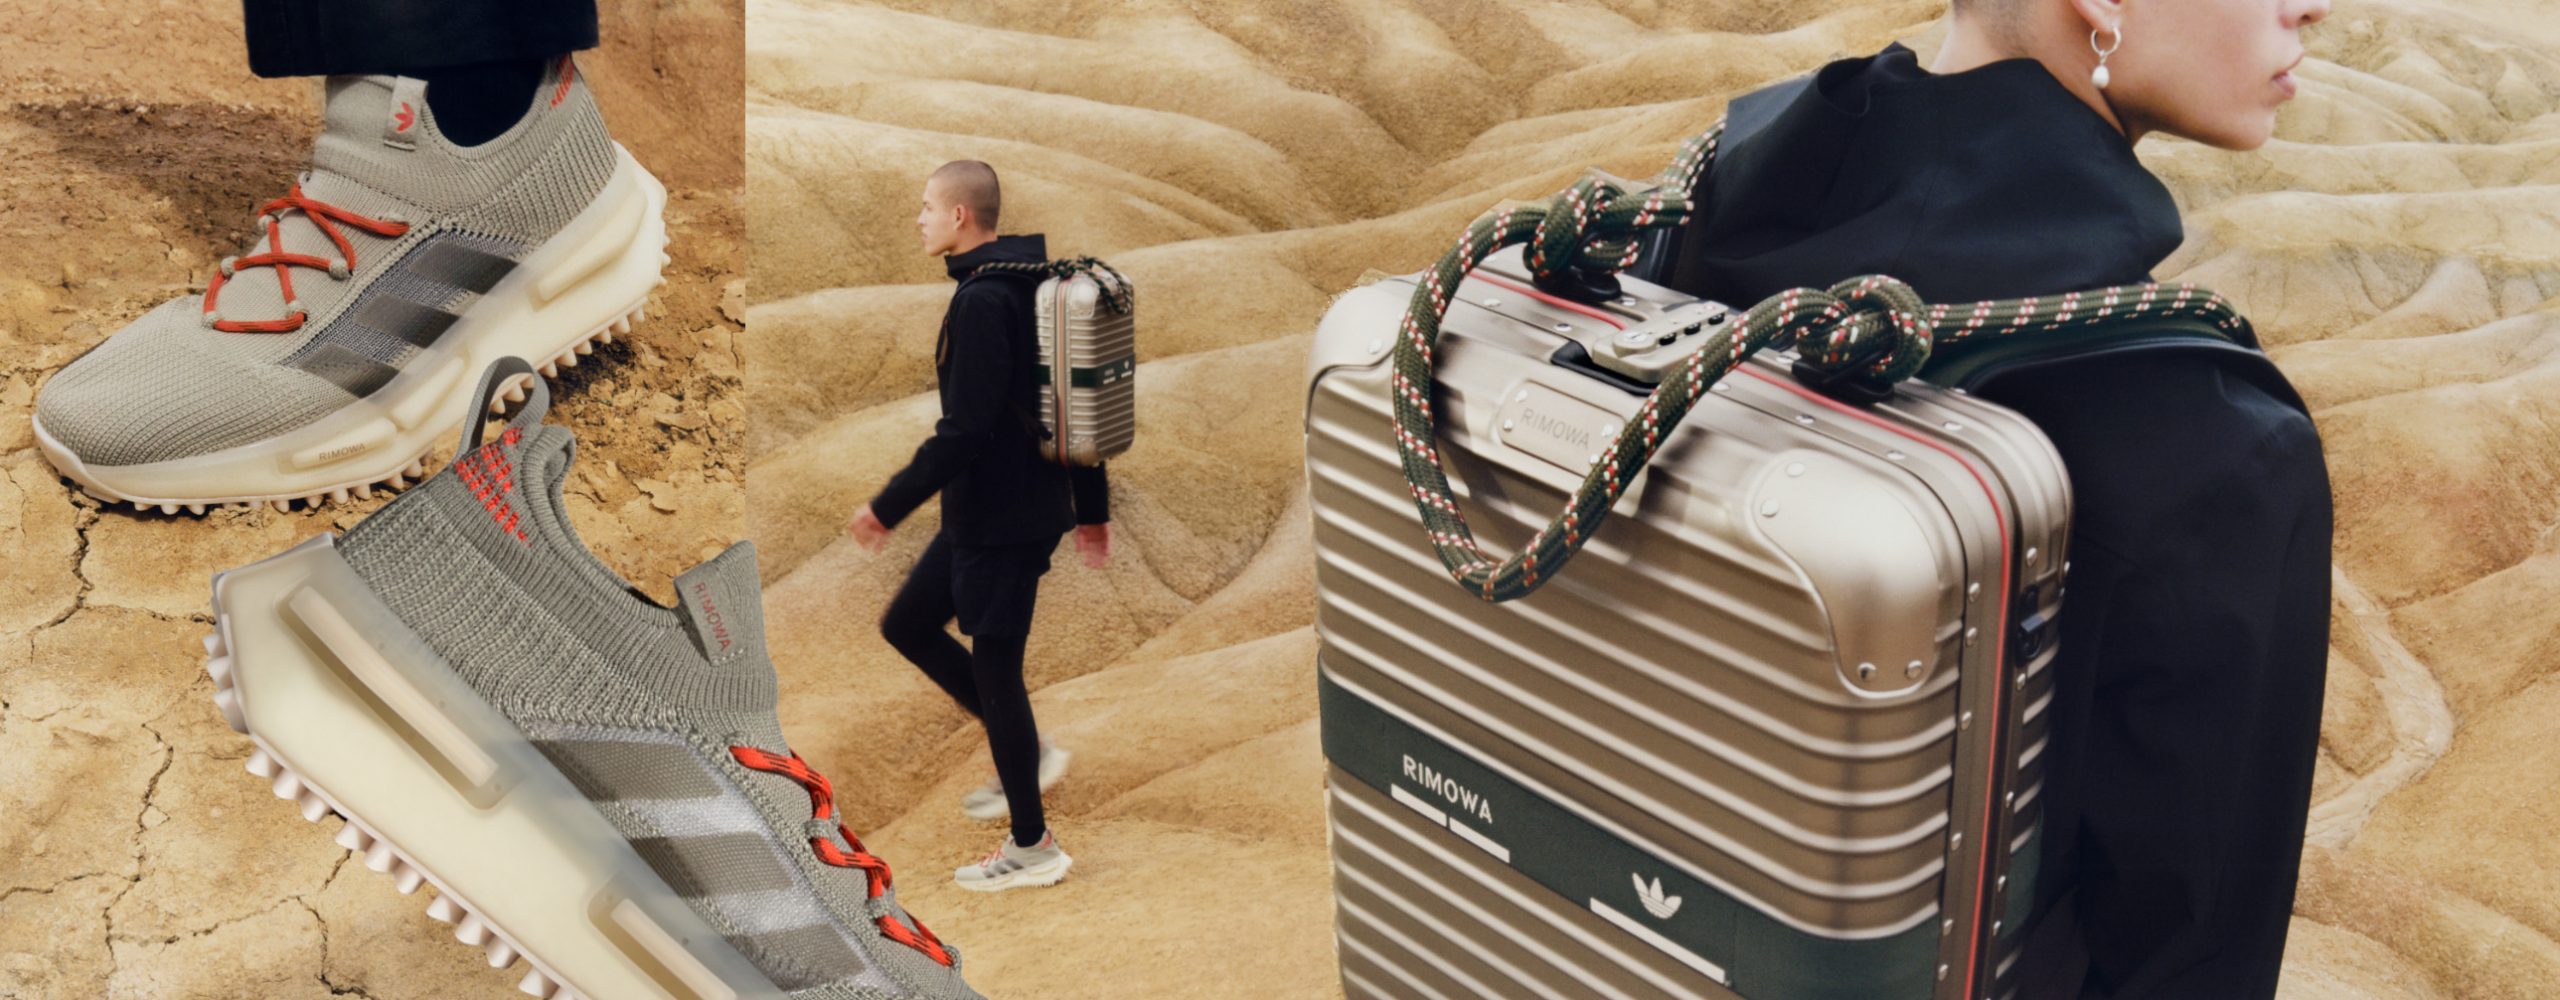 RIMOWA and adidas Just Dropped a Steezy $3,000 Travel Pack